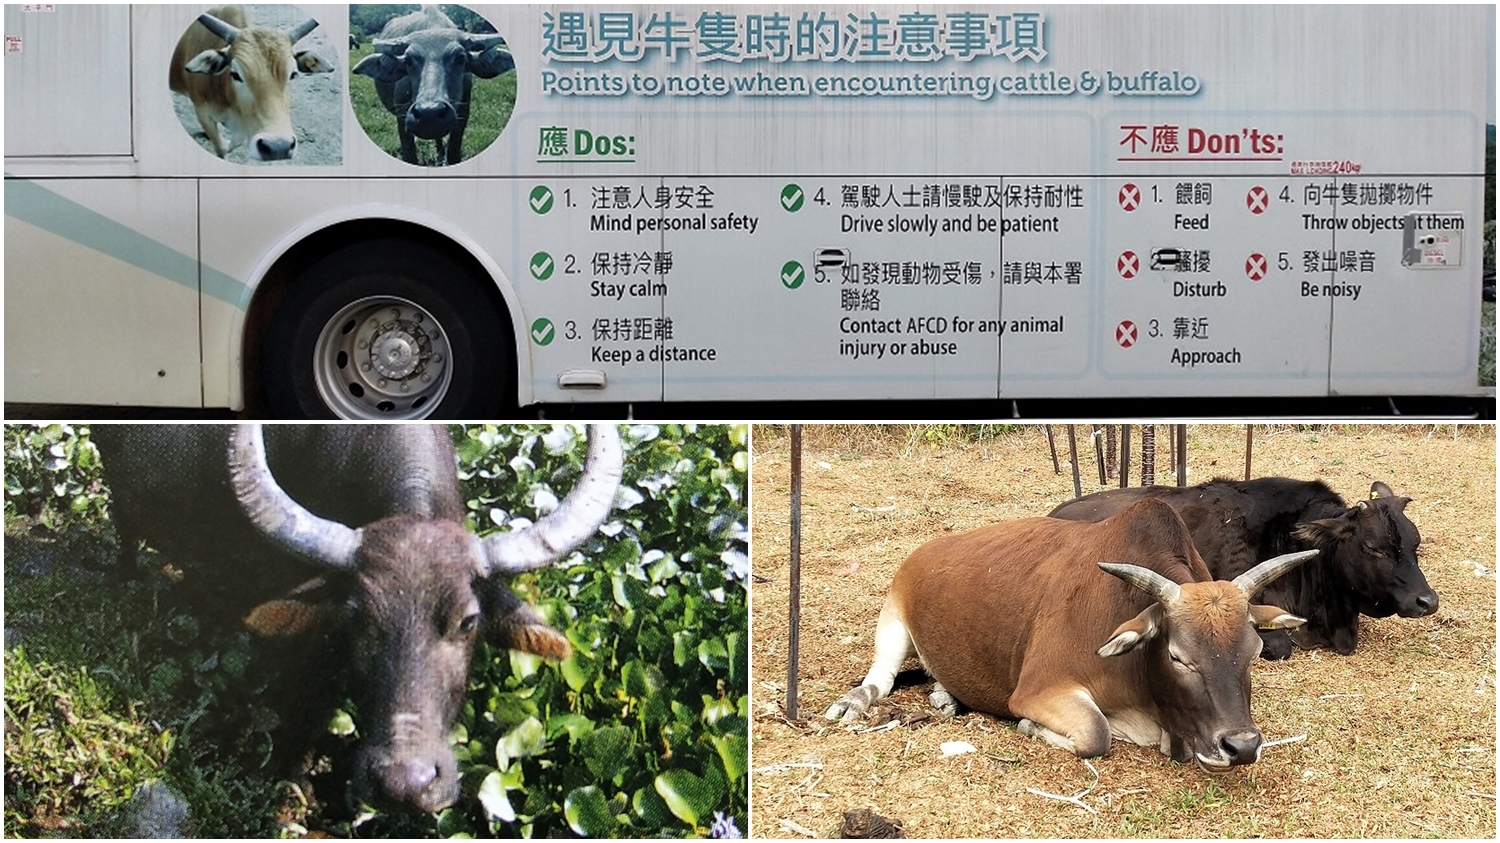 Travelers should follow the guidelines when encountering cattle and buffalo to keep safety